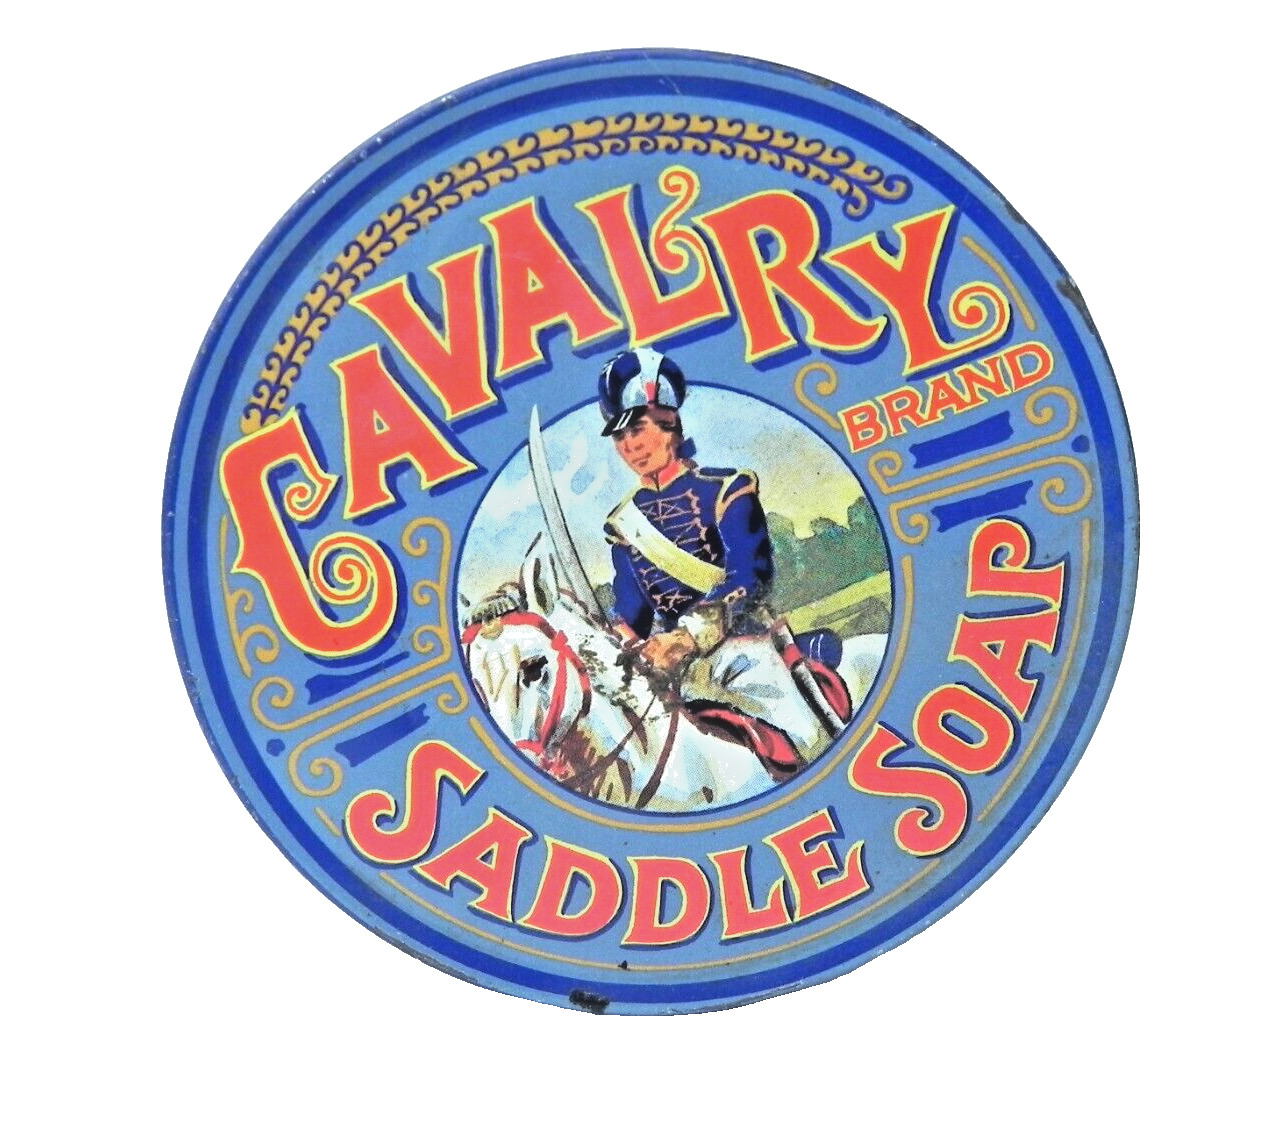 Vintage Cavalry Saddle Soap Round Advertising Tin England Case Troopers Friend